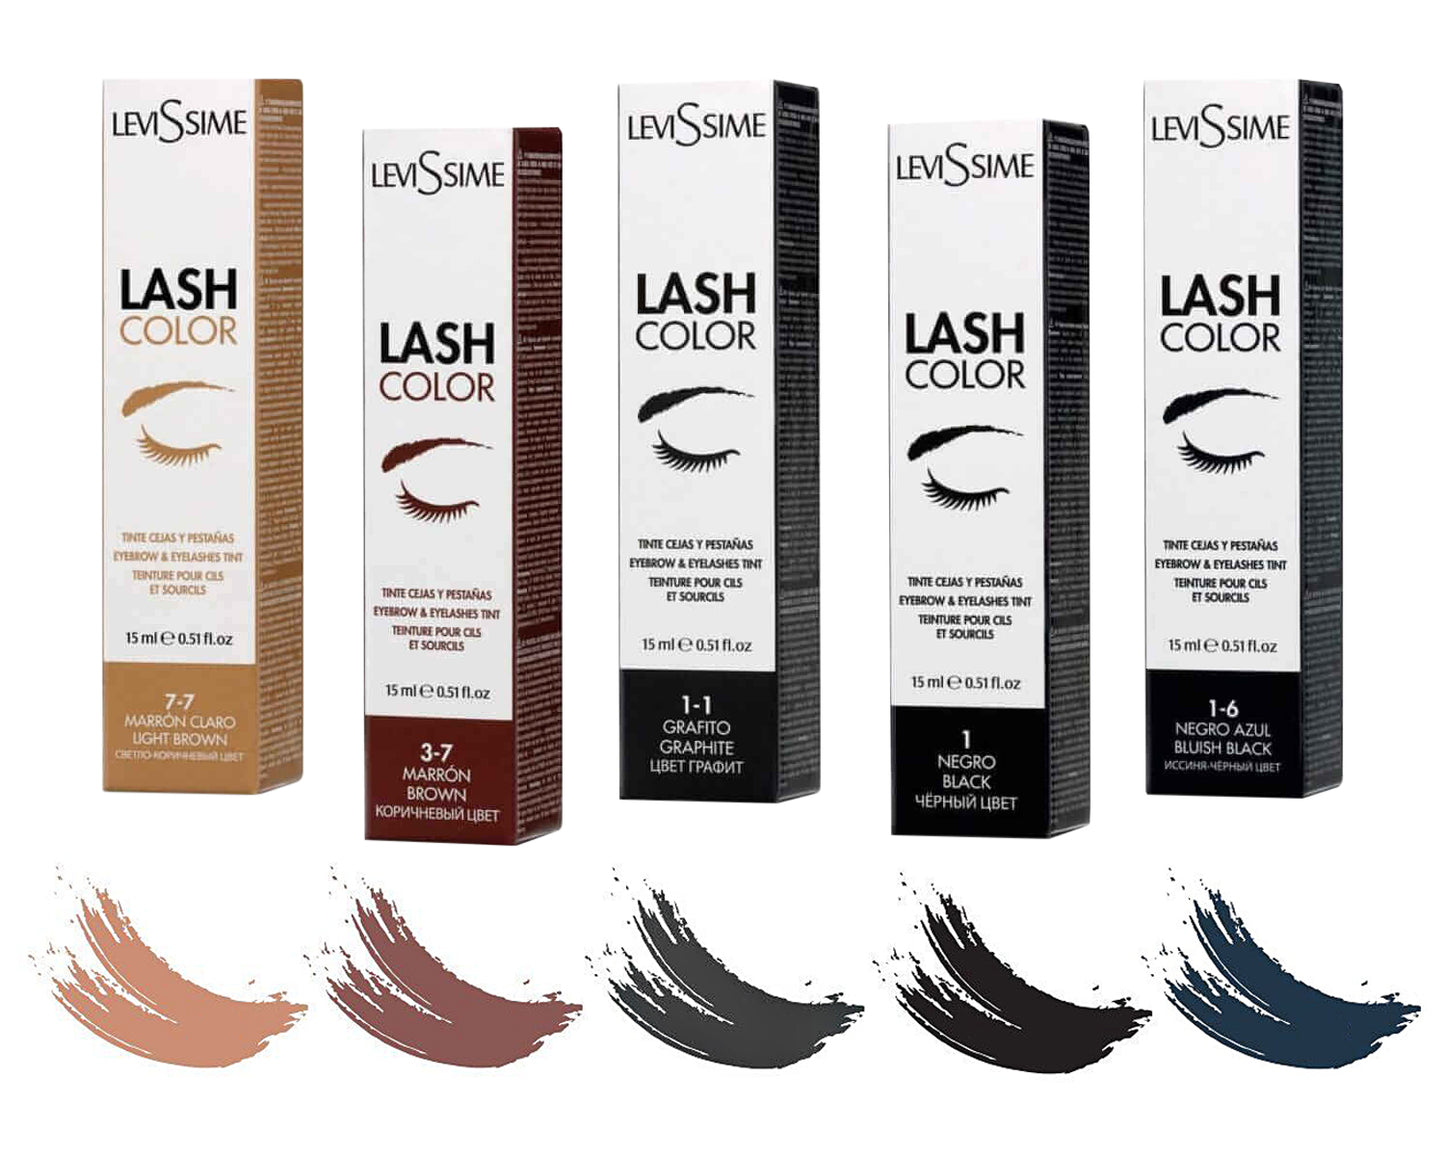 Paint for eyebrows and eyelashes Lash Color LeviSsime